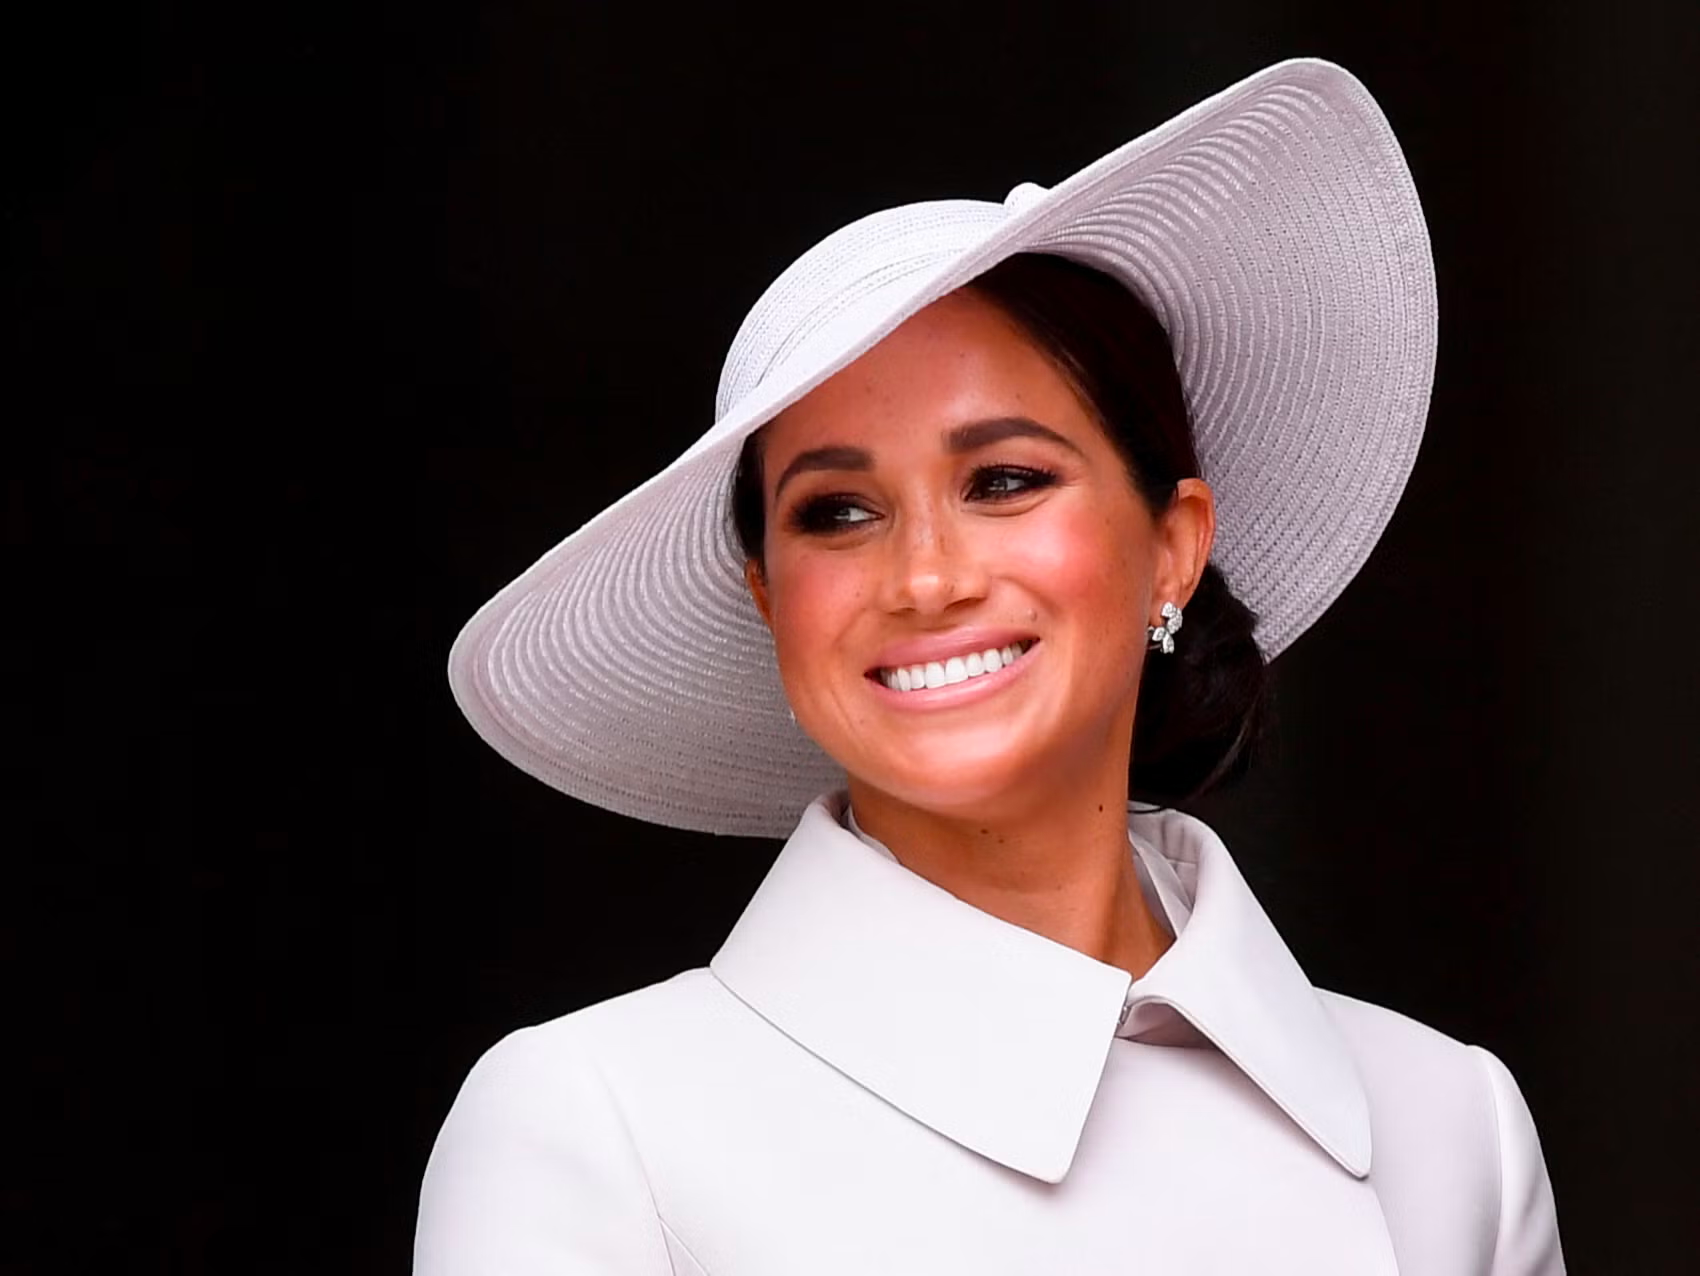 Meghan Markle is wearing a big hat and smiling.